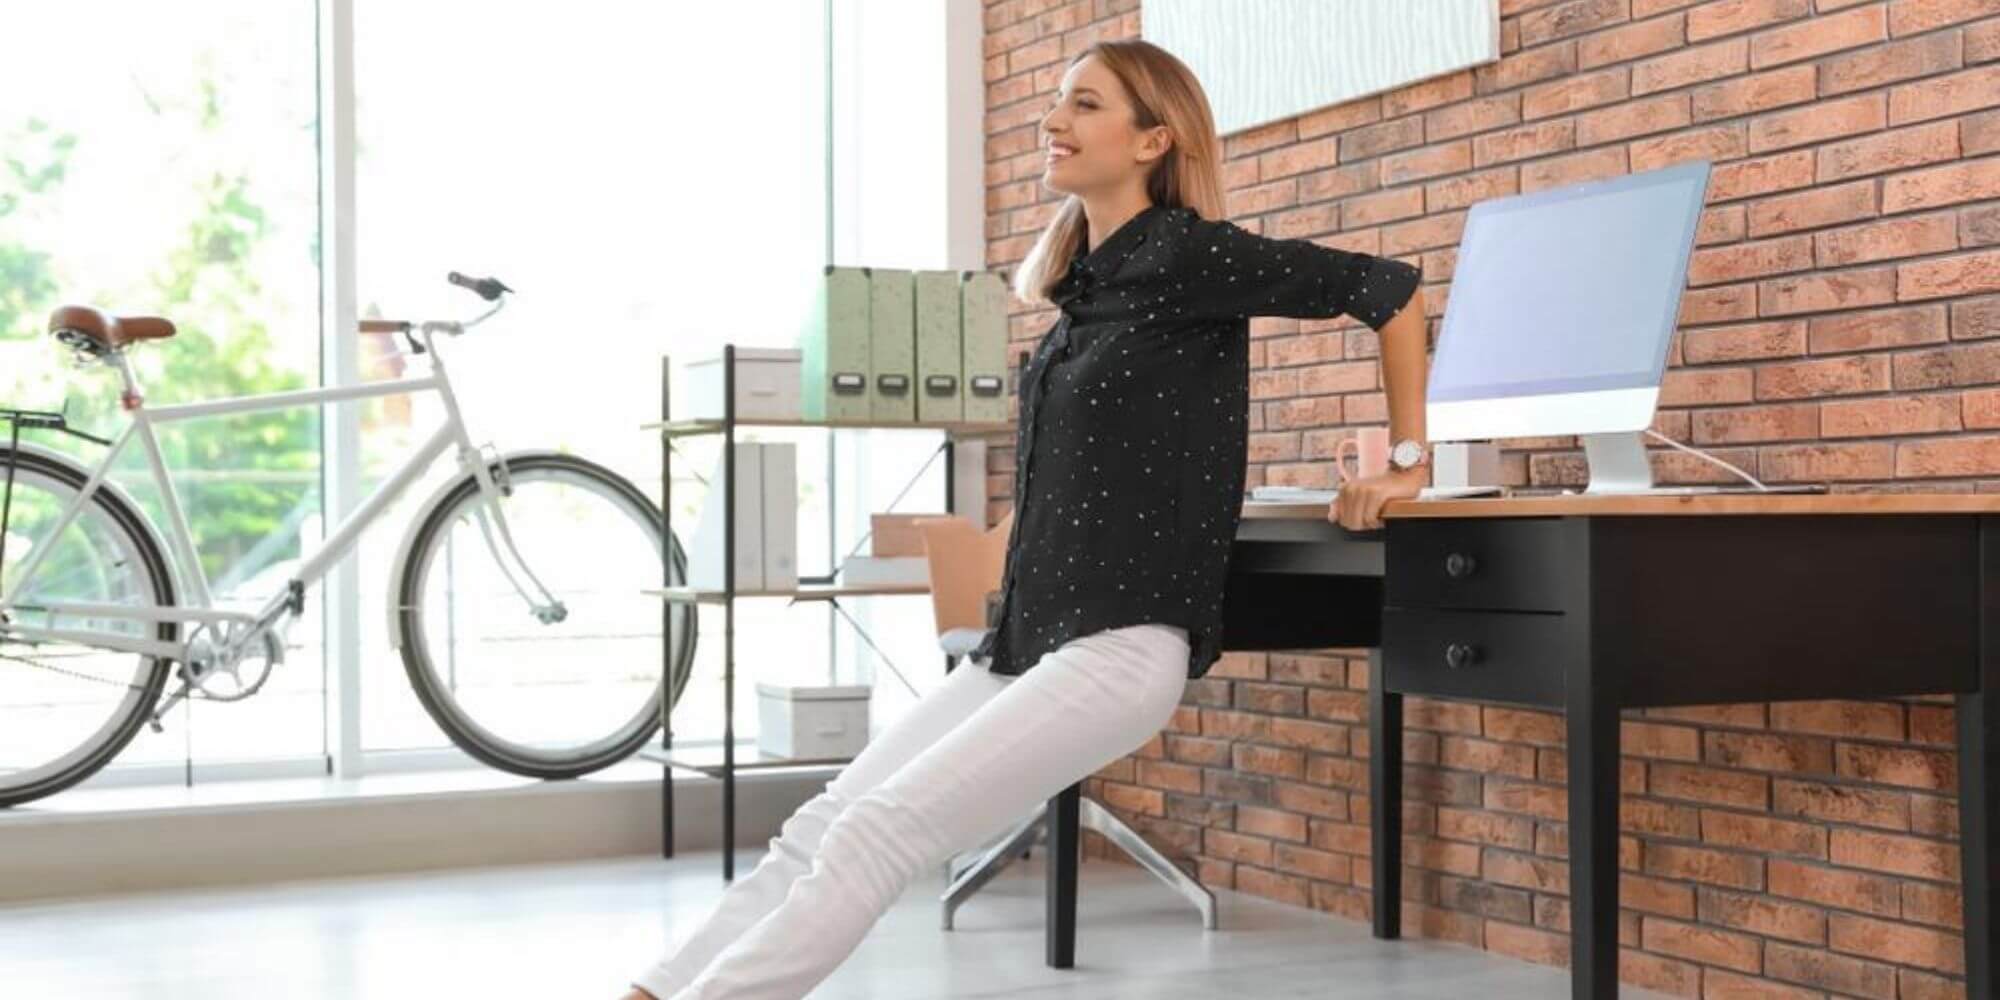 Smiling woman doing dip exercises at her desk in her home